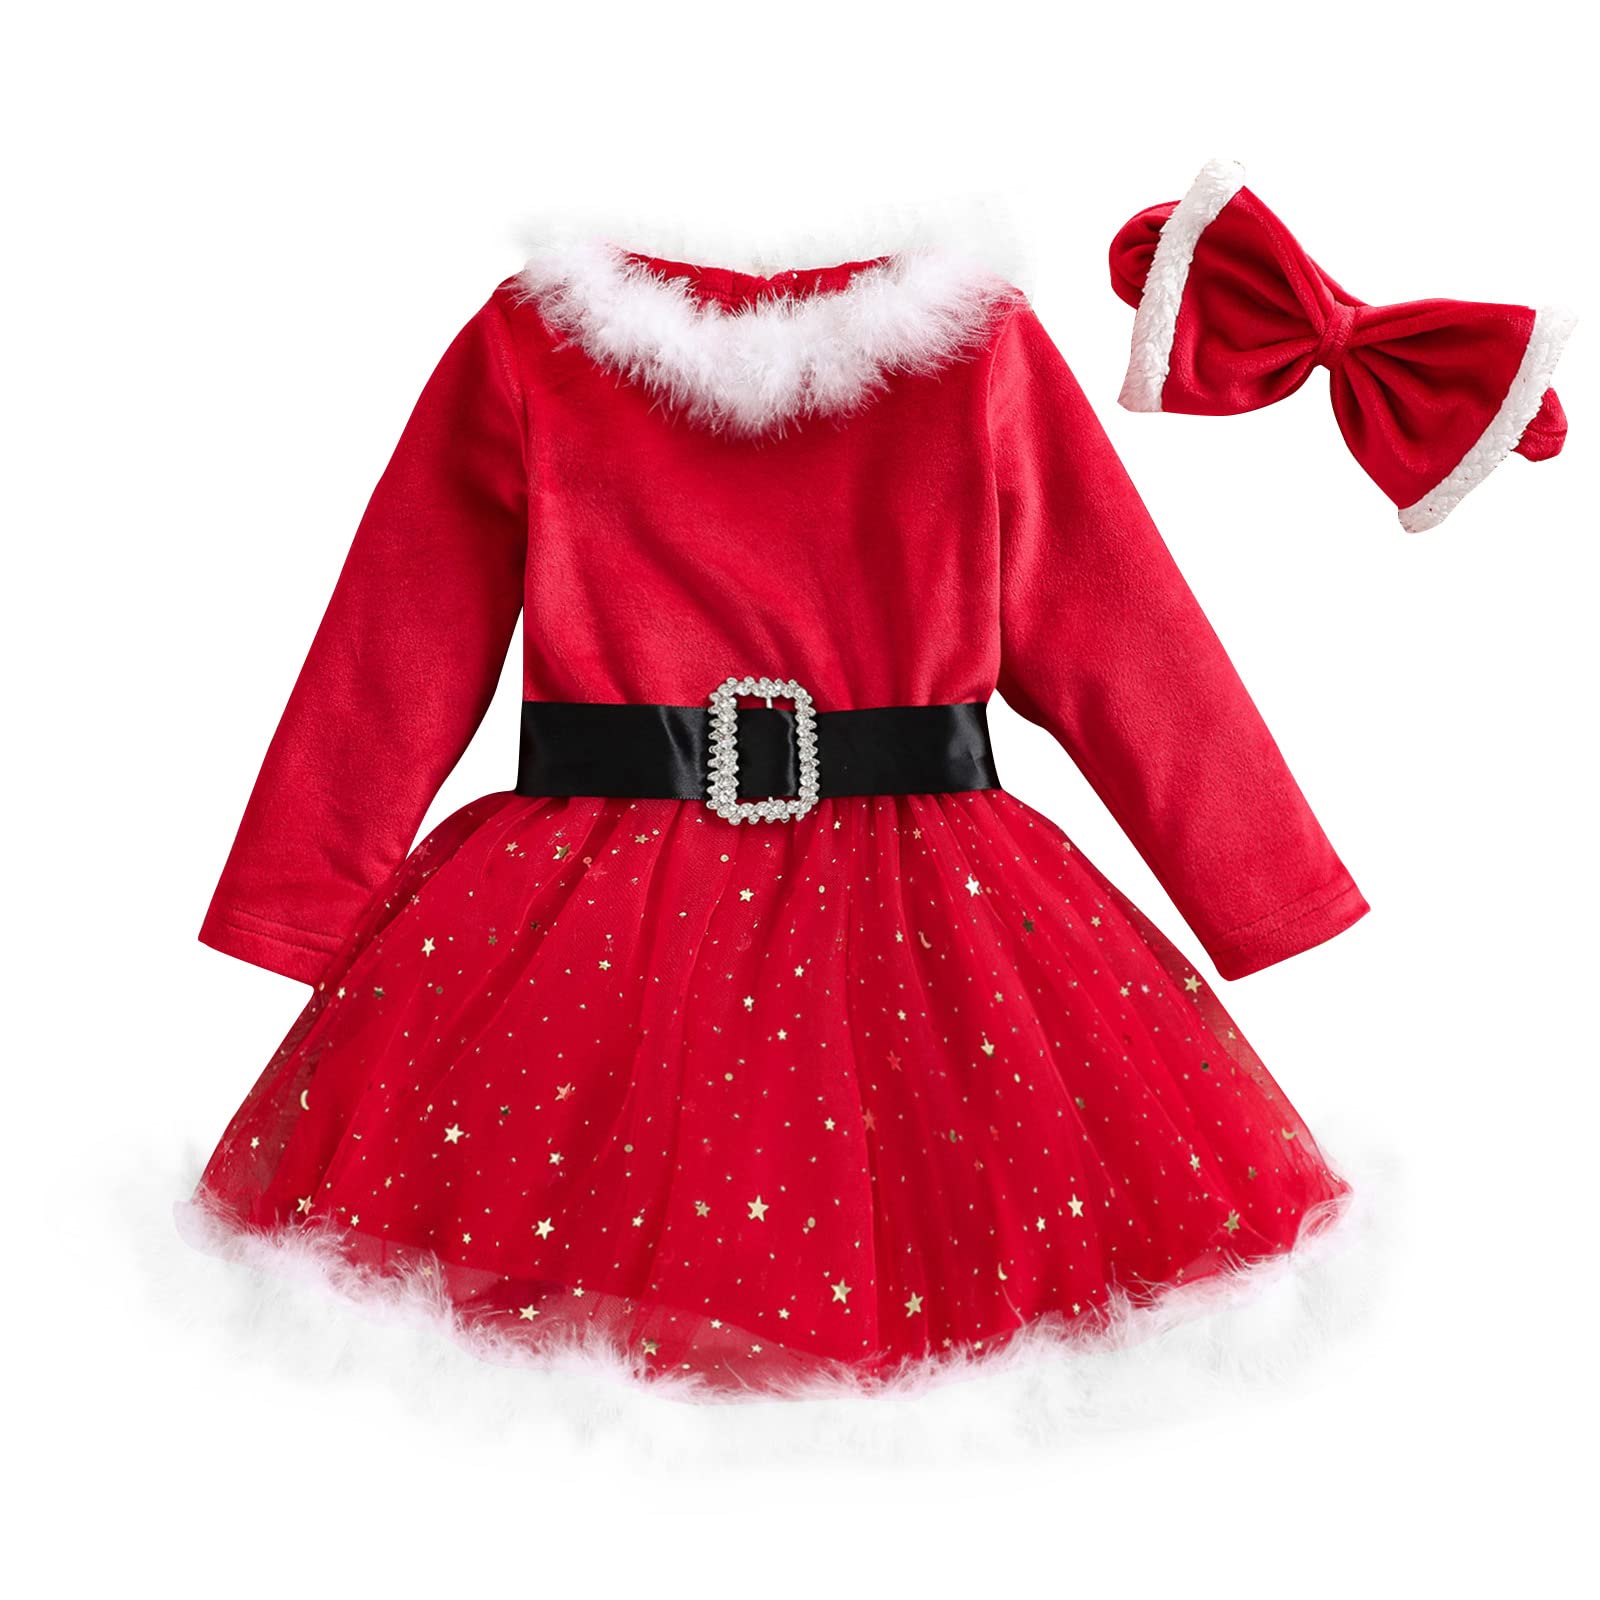 [MISOAMISO] Kids girl Christmas sun ta dress child One-piece sun ta costume red red formal .. material party production for 